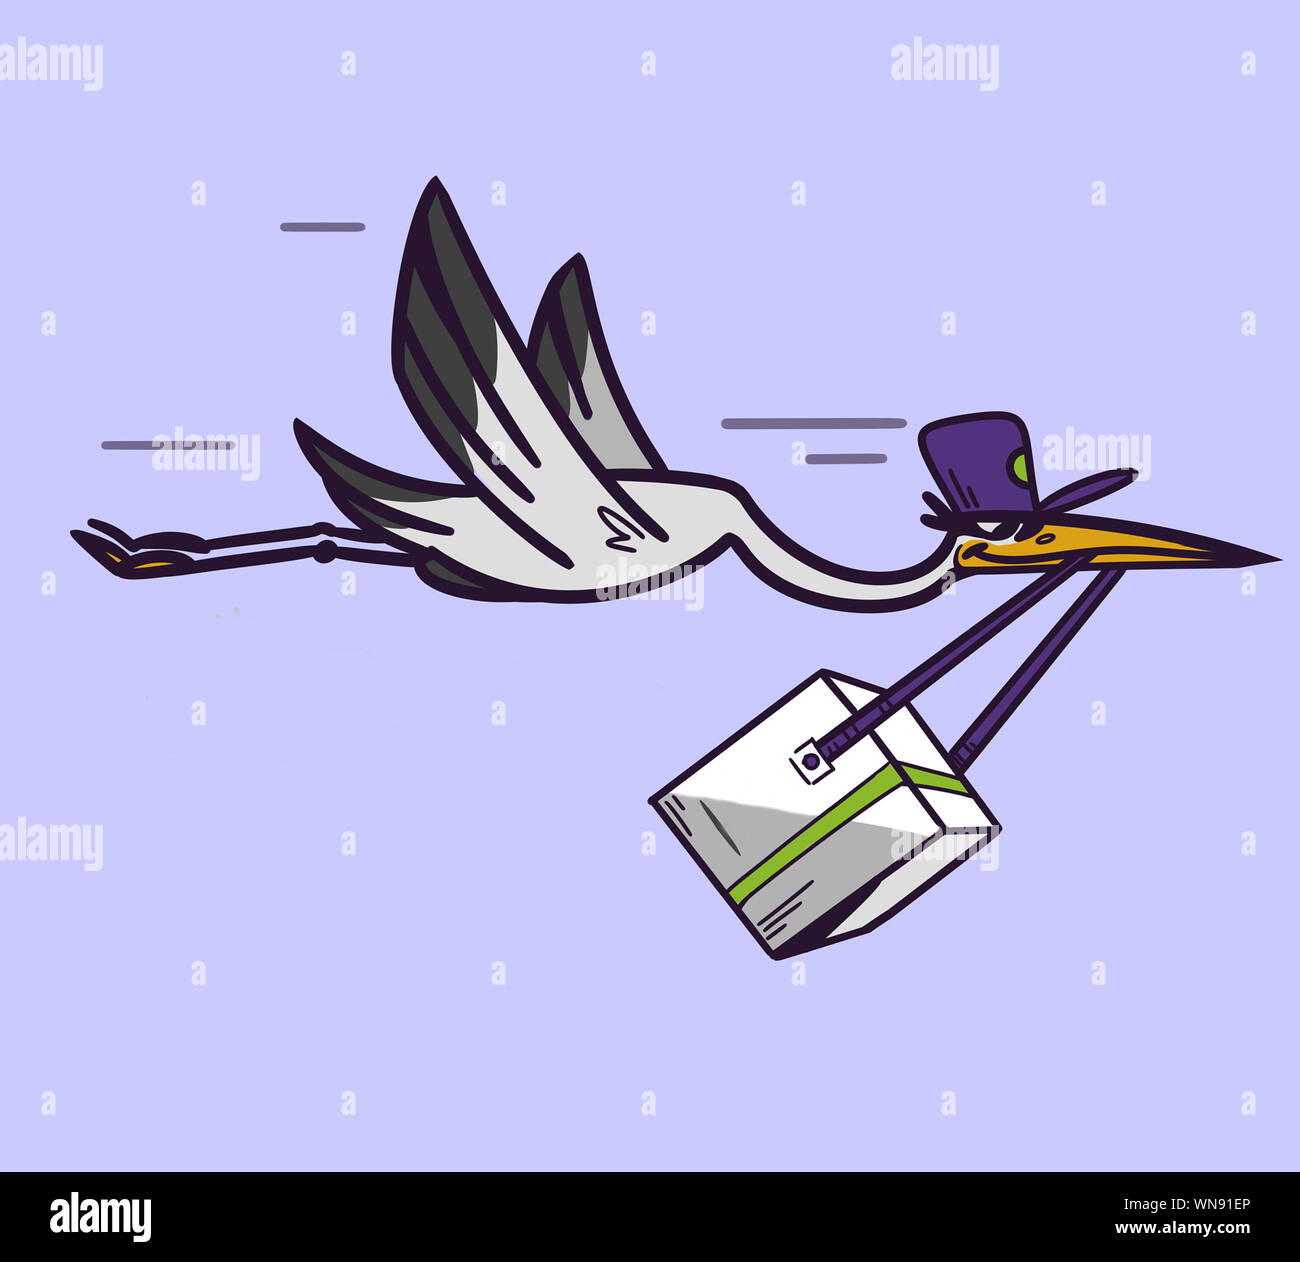 season special delivery of goods from stork in a bag., illustration Stock Photo